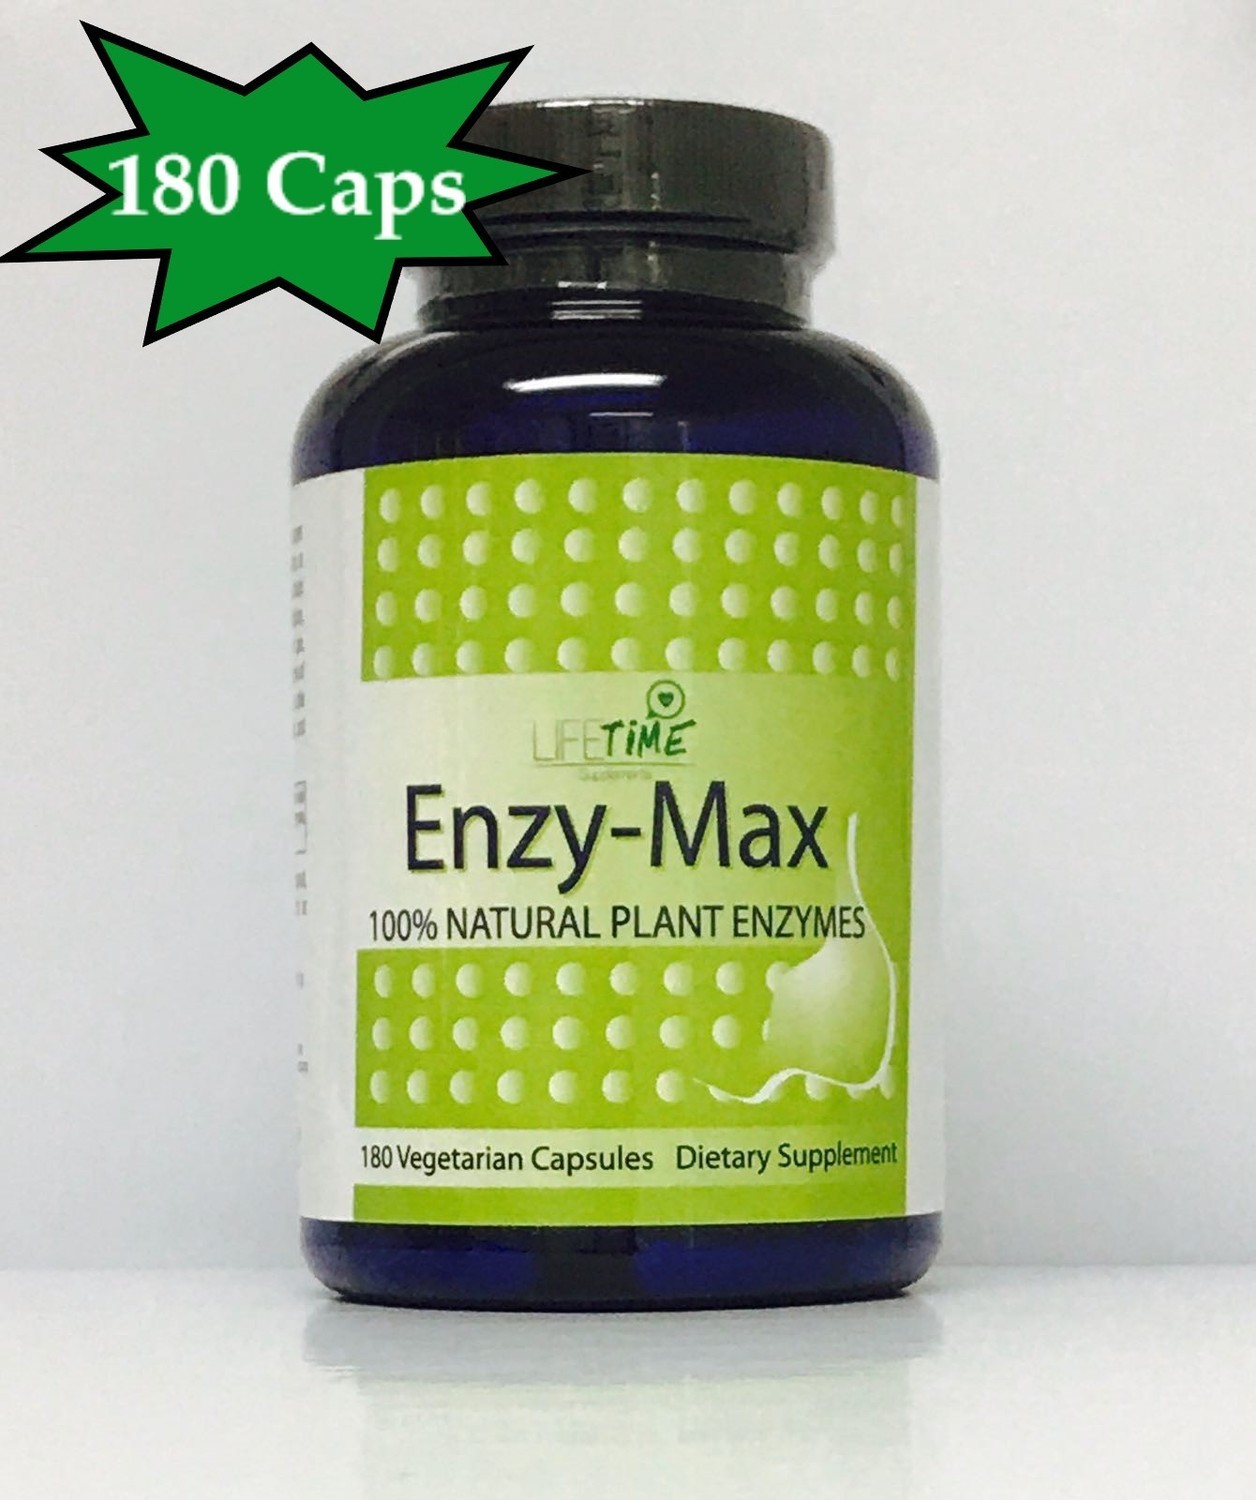 Enzymax - Natural plant enzymes 180 capsules (Backordered Until April 15th)